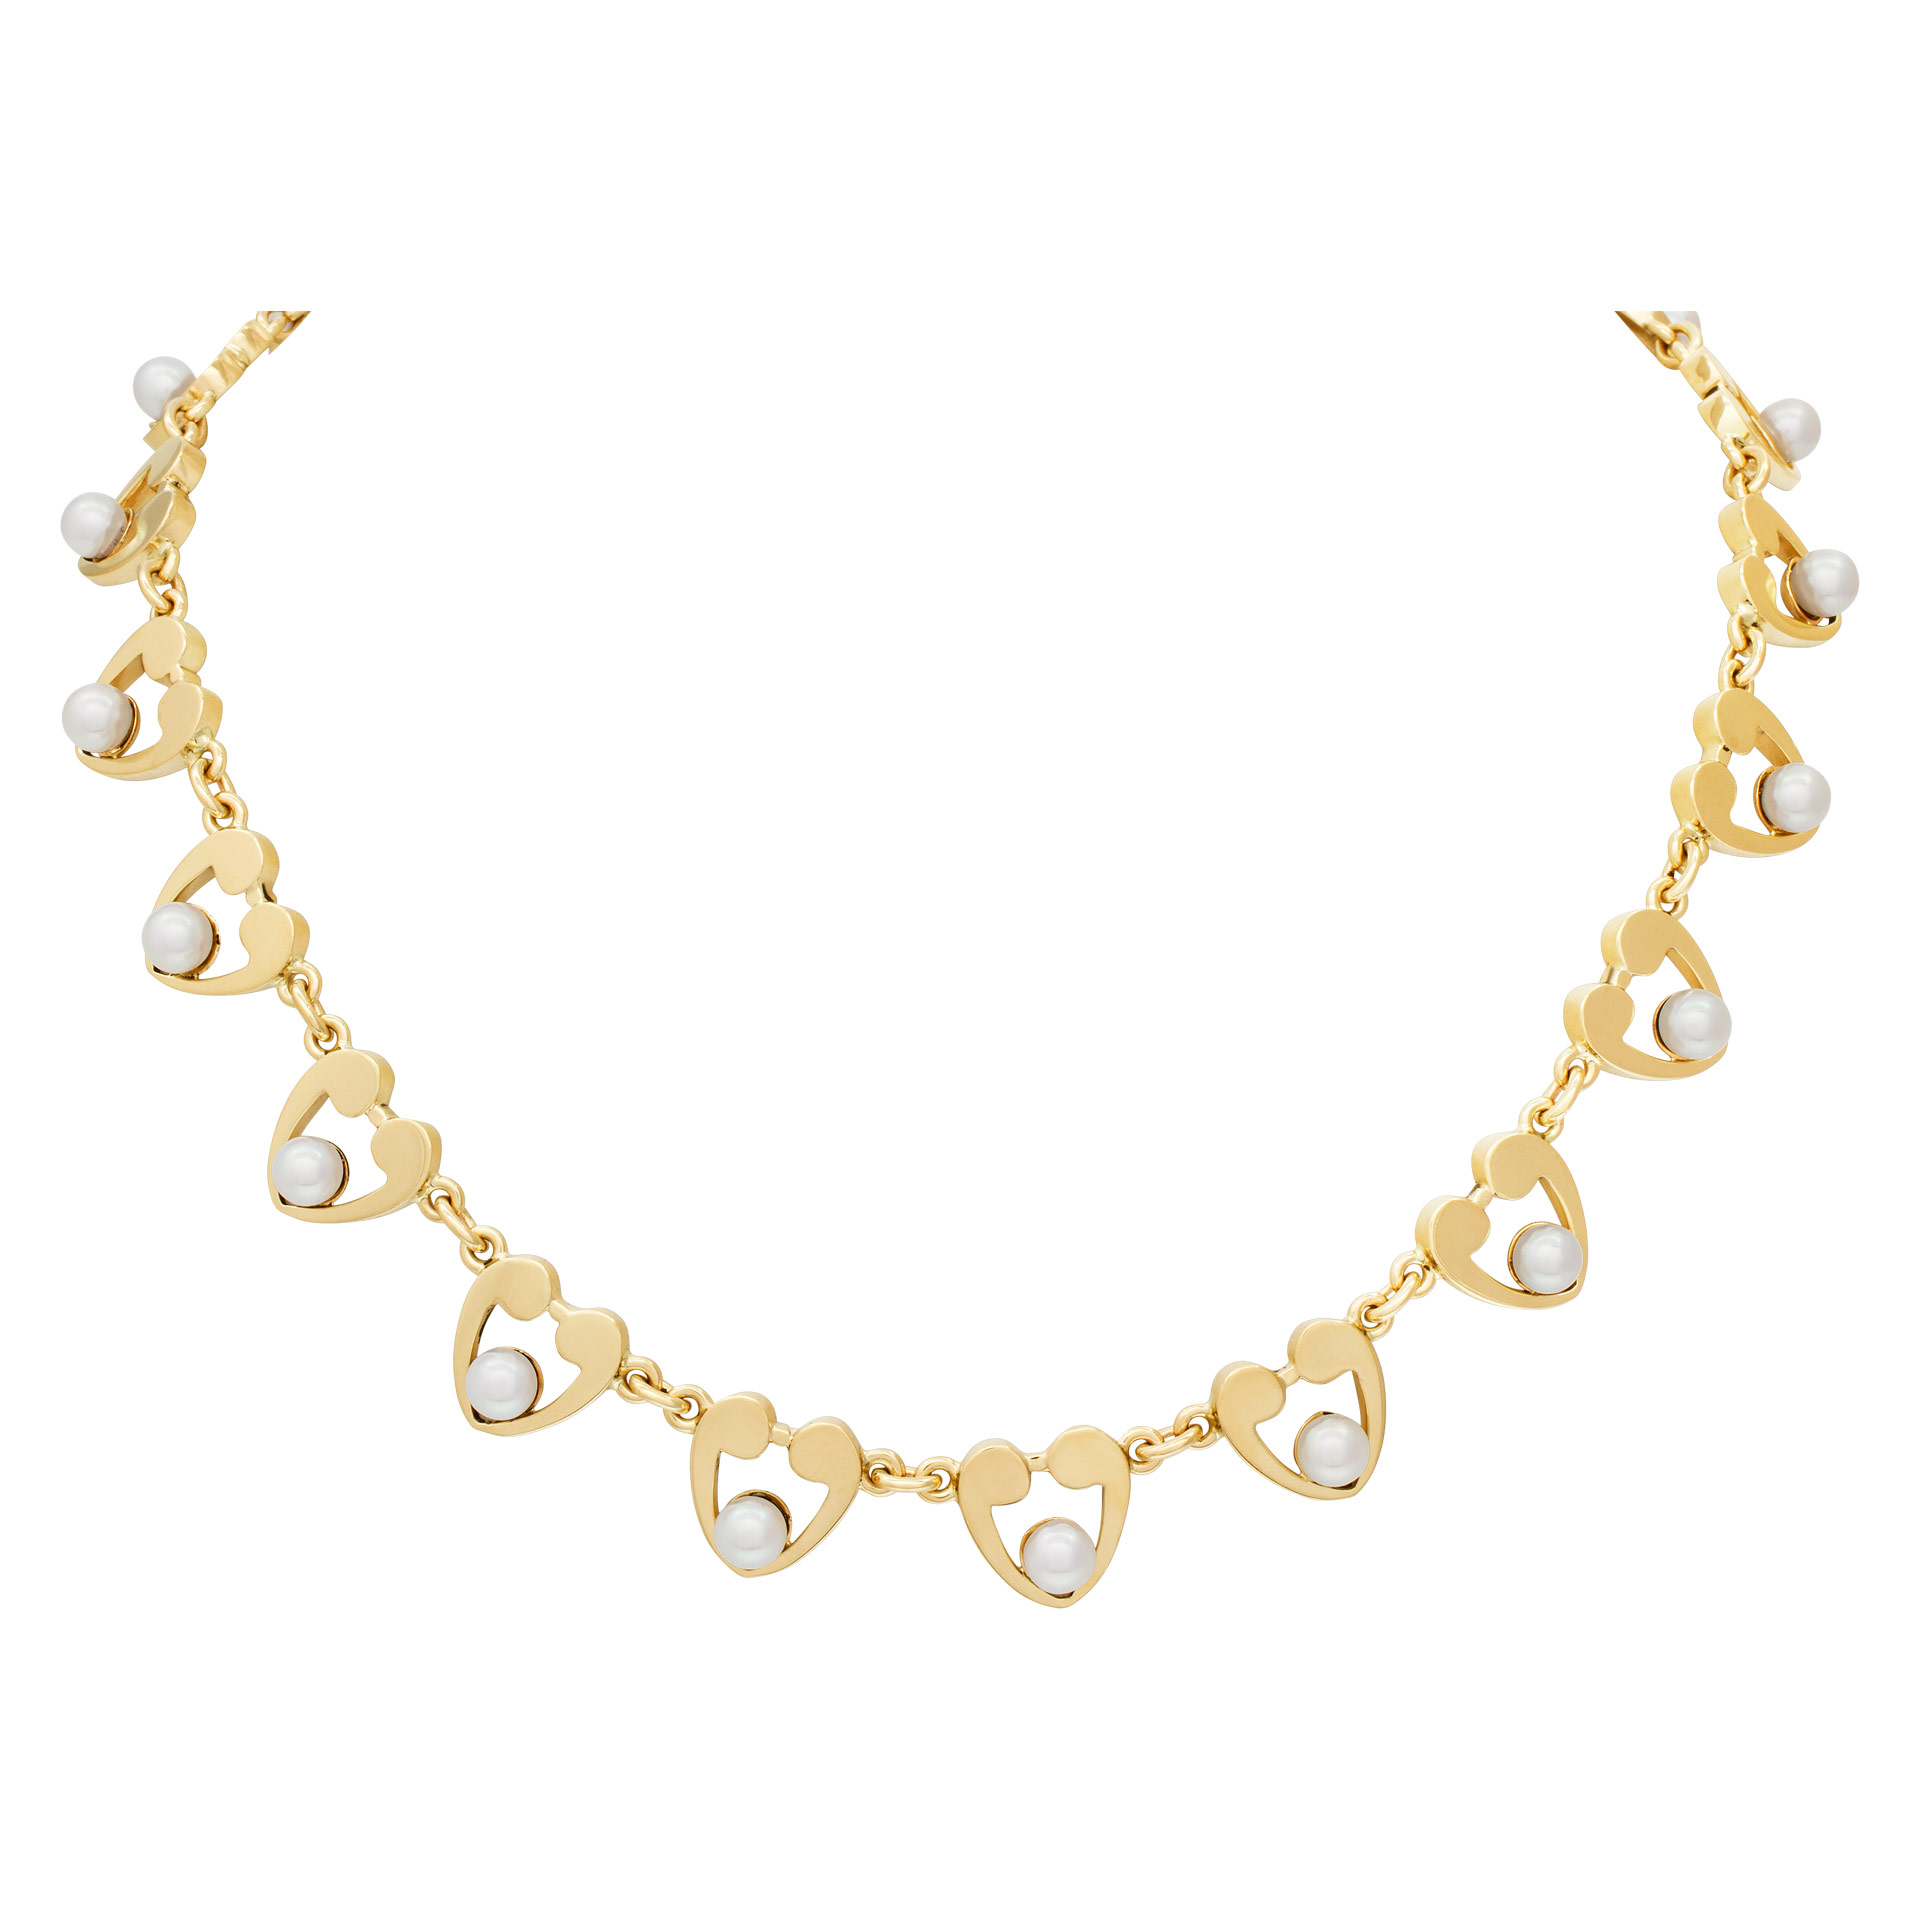 Cultured pearls (5x5.5mm) and sytlish heart design necklace in soild 14k yelllow gold. Choker necklace length: 15''. image 1